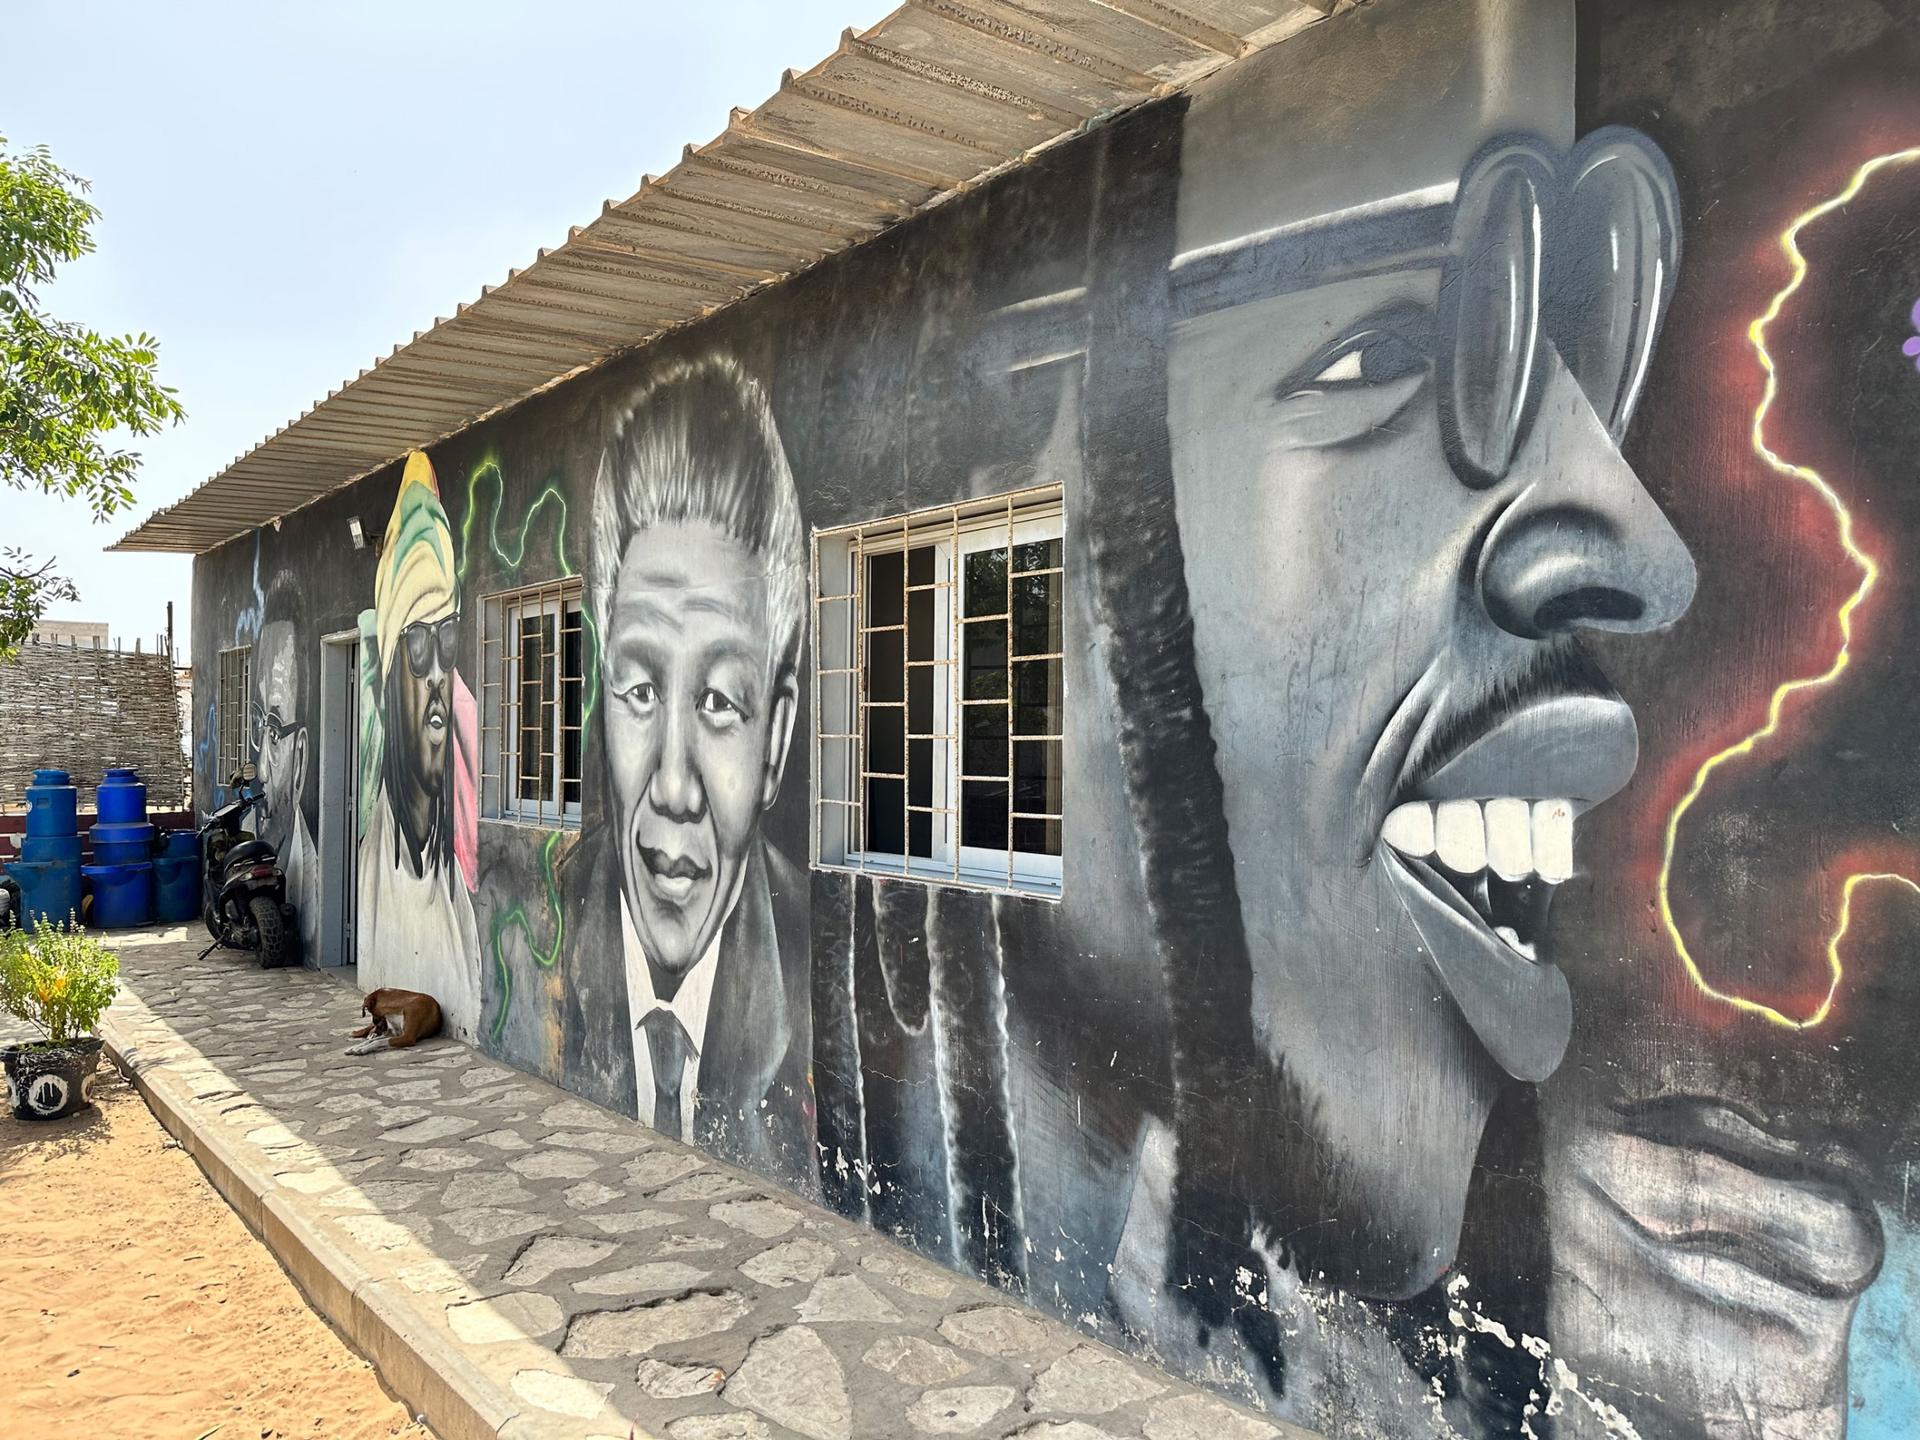 Mural at the organization G-Hip Hop, a community center and educational organization co-founded by Paco. 